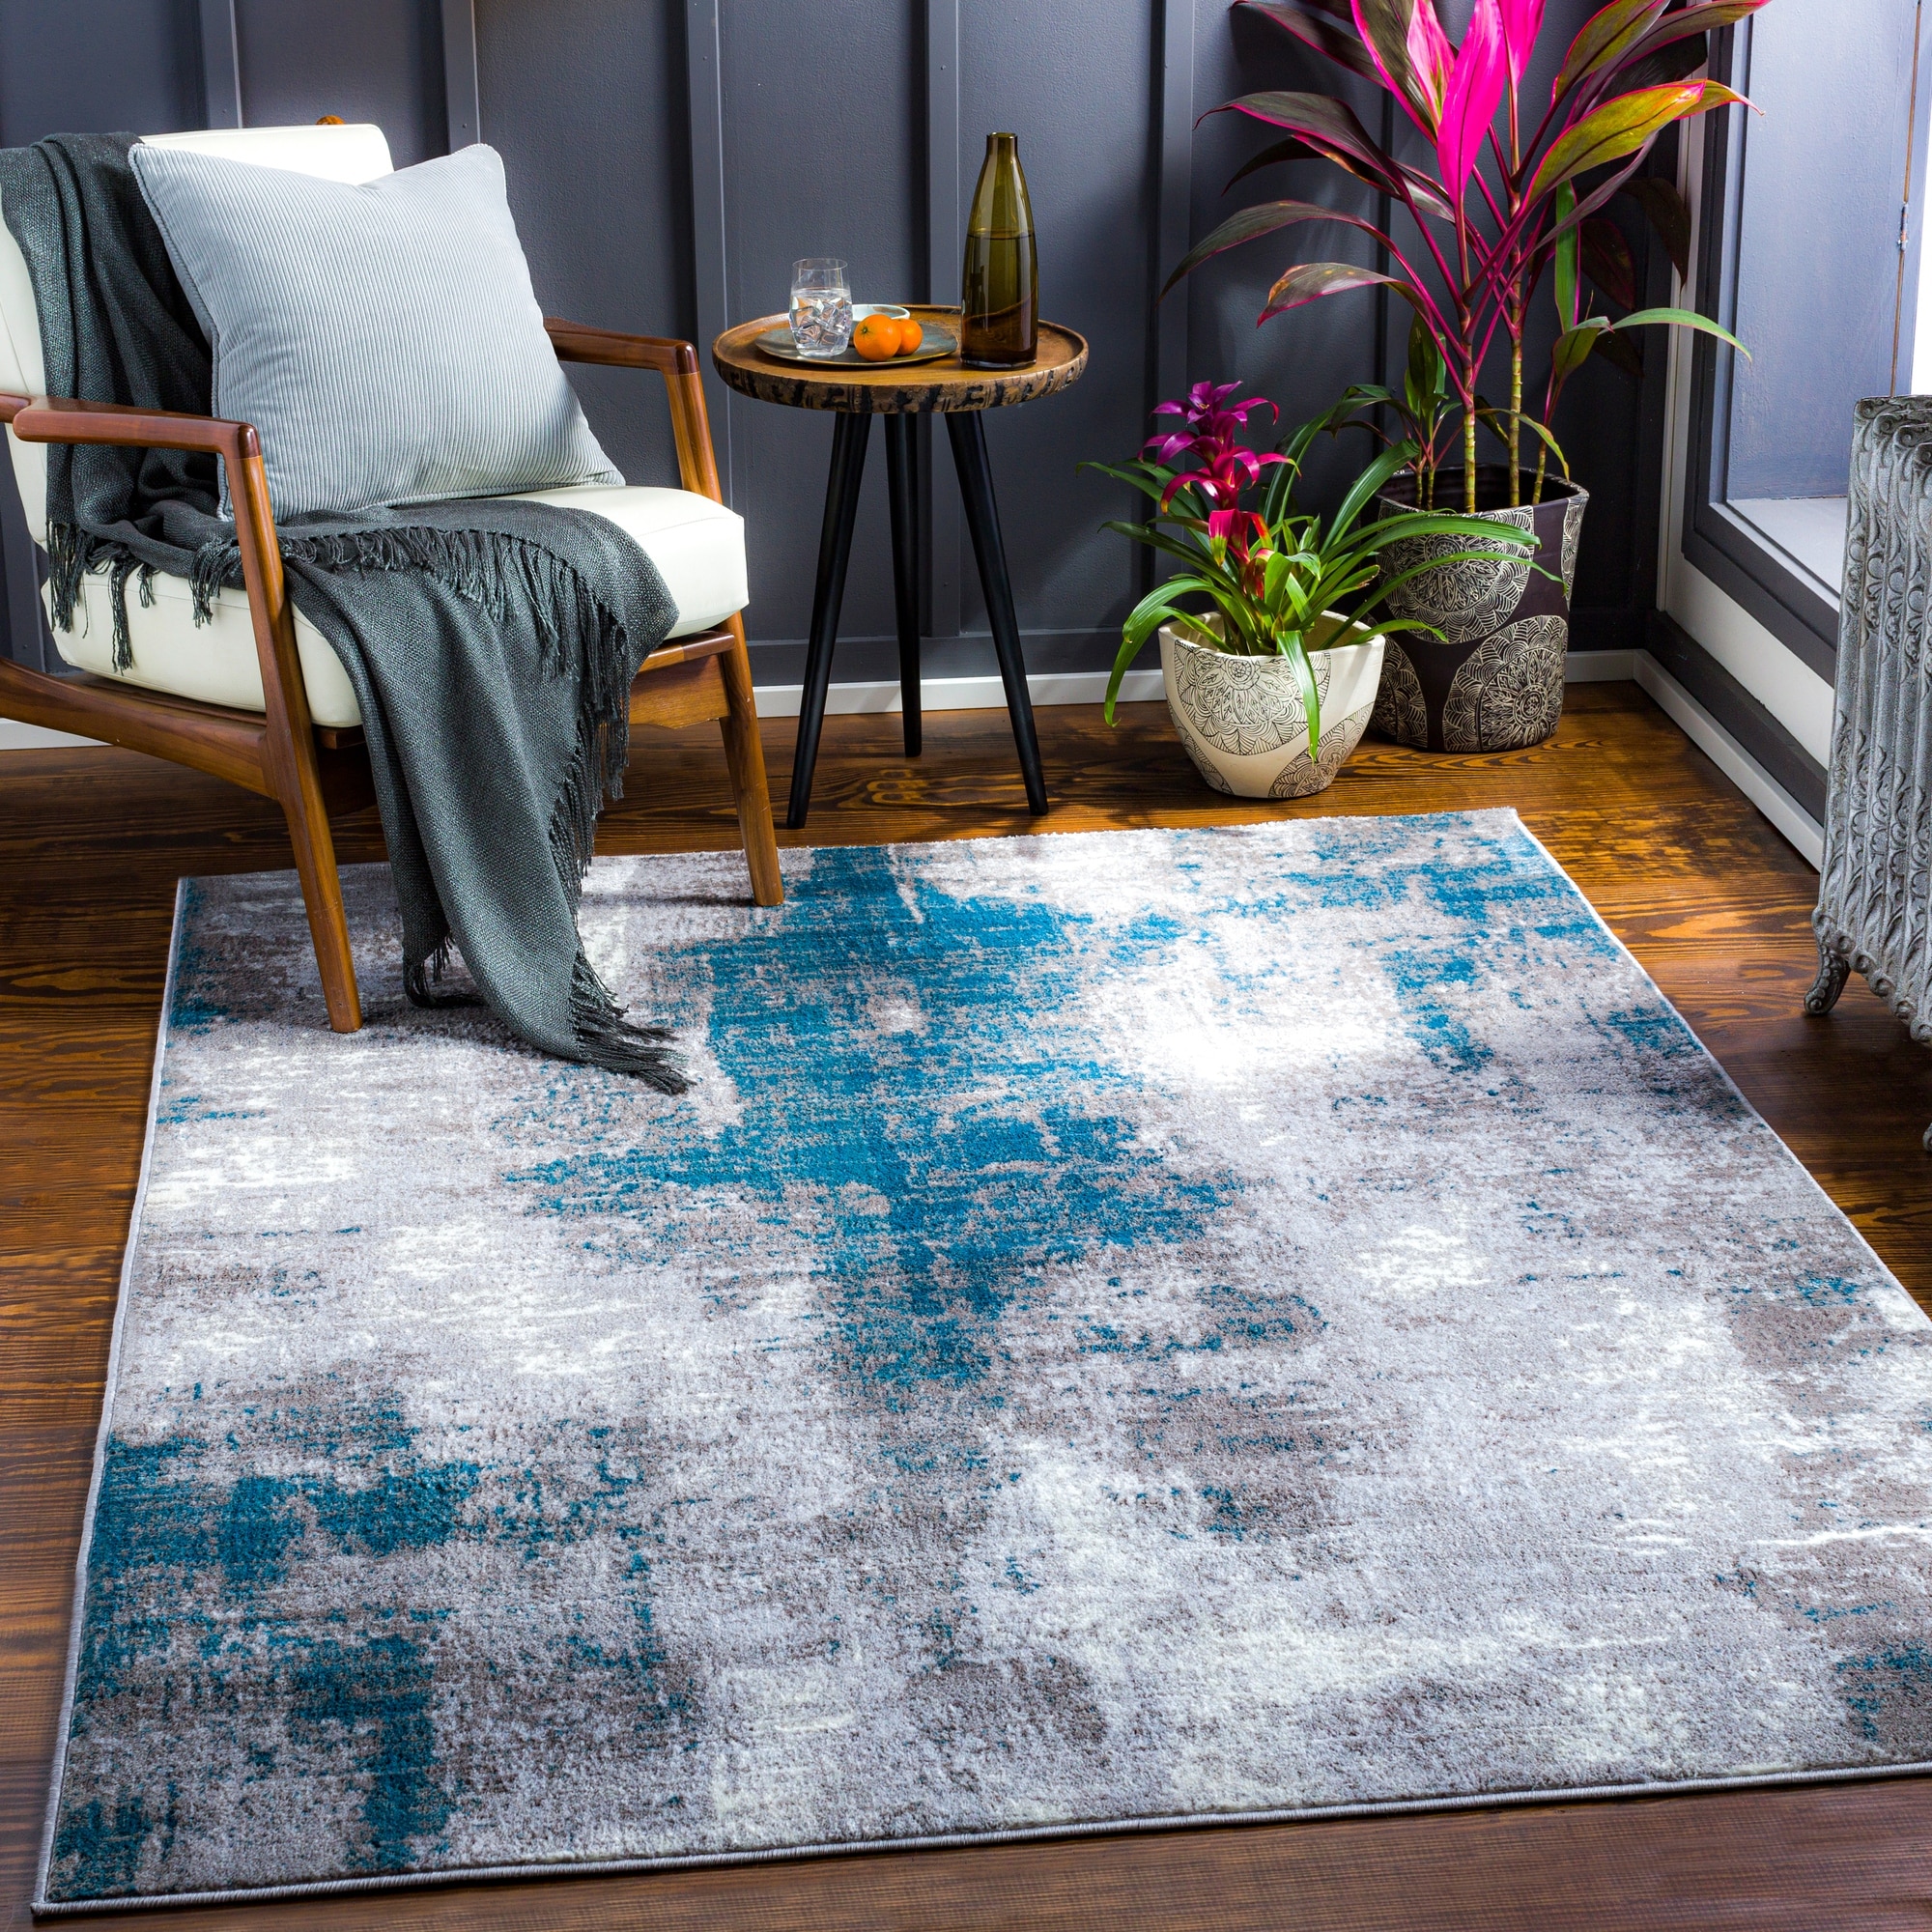 Artistic Weavers Cooke Industrial Abstract Area Rug - On Sale